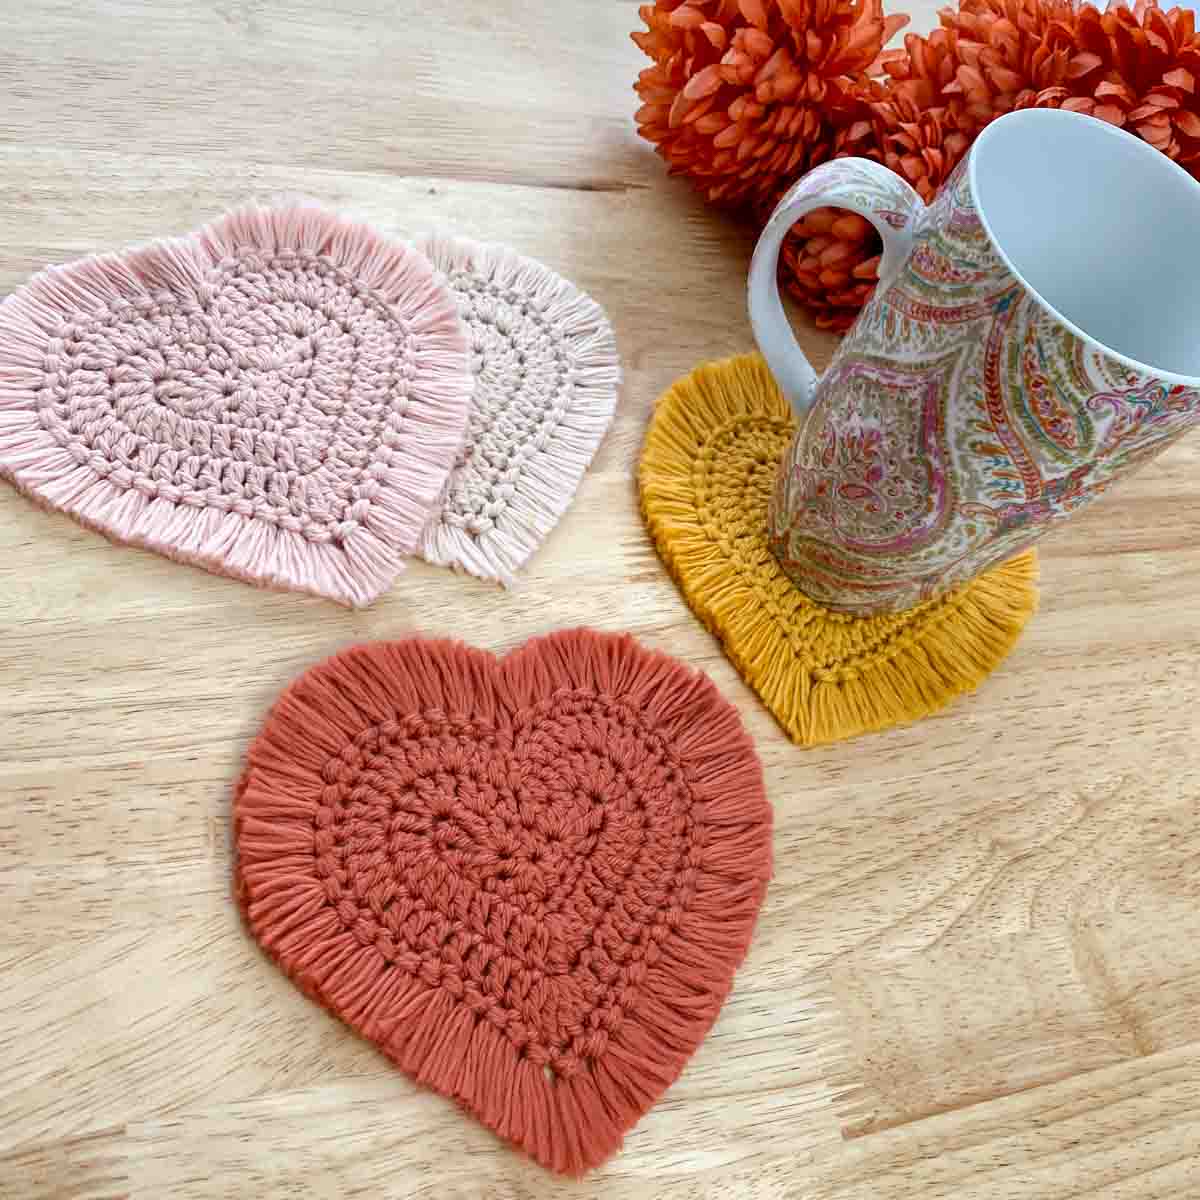 a colorful mug sitting on a crochet heart coaster with other crochet hearts sitting nearby